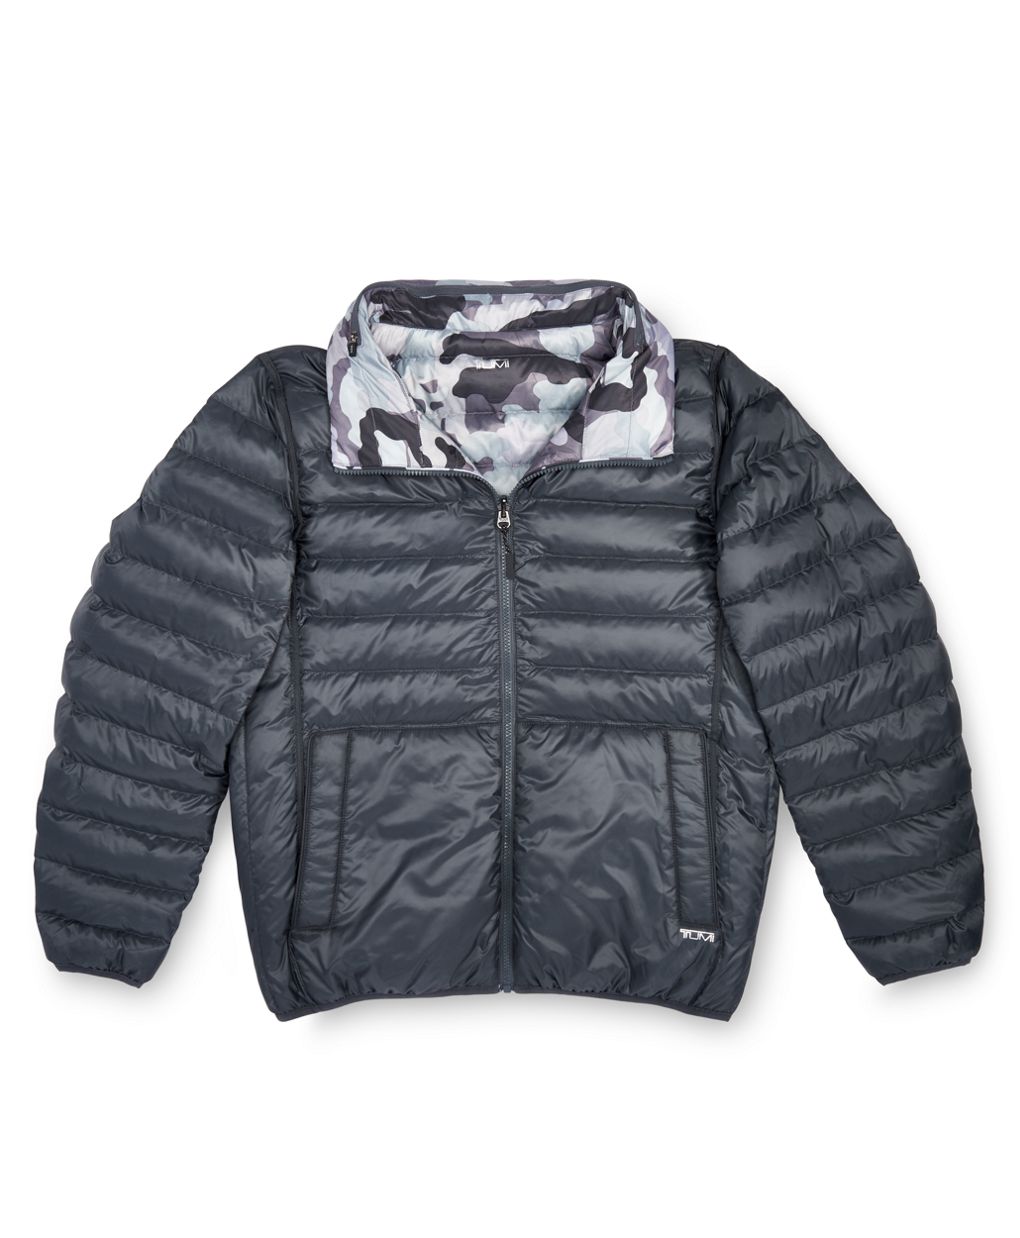 Shop TUMI Two-In-One Tumipax Puffer Jacket & Travel Pillow